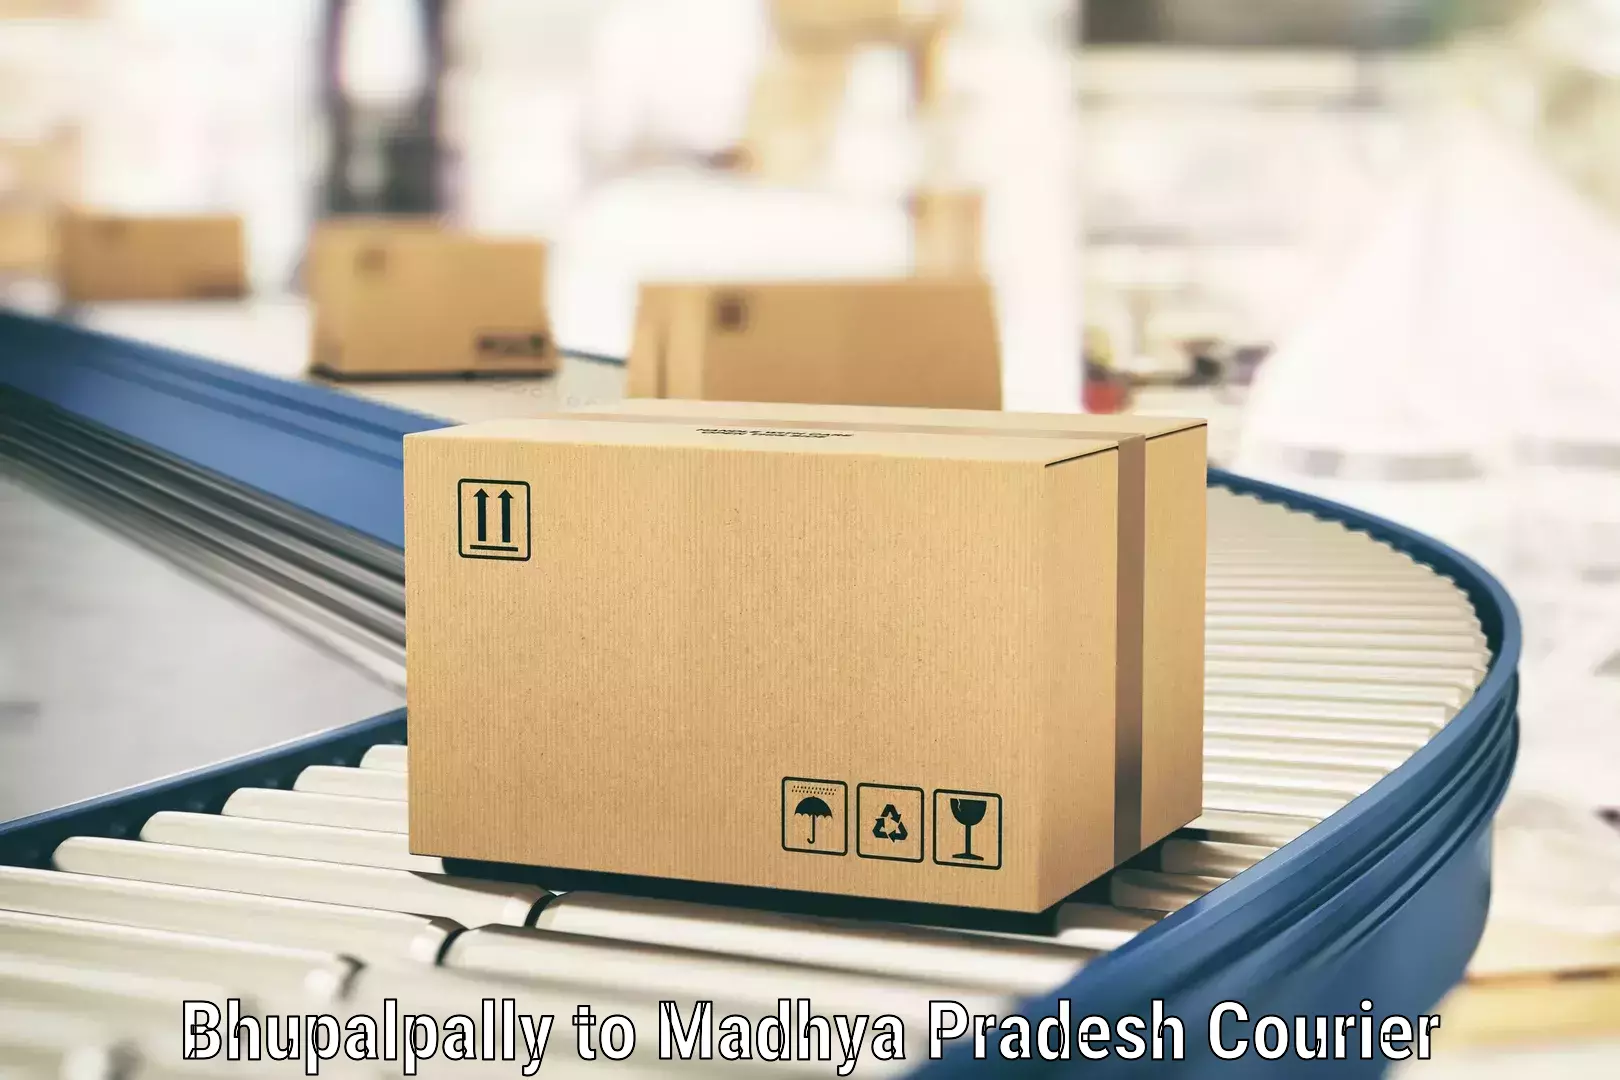 State-of-the-art courier technology Bhupalpally to Agar